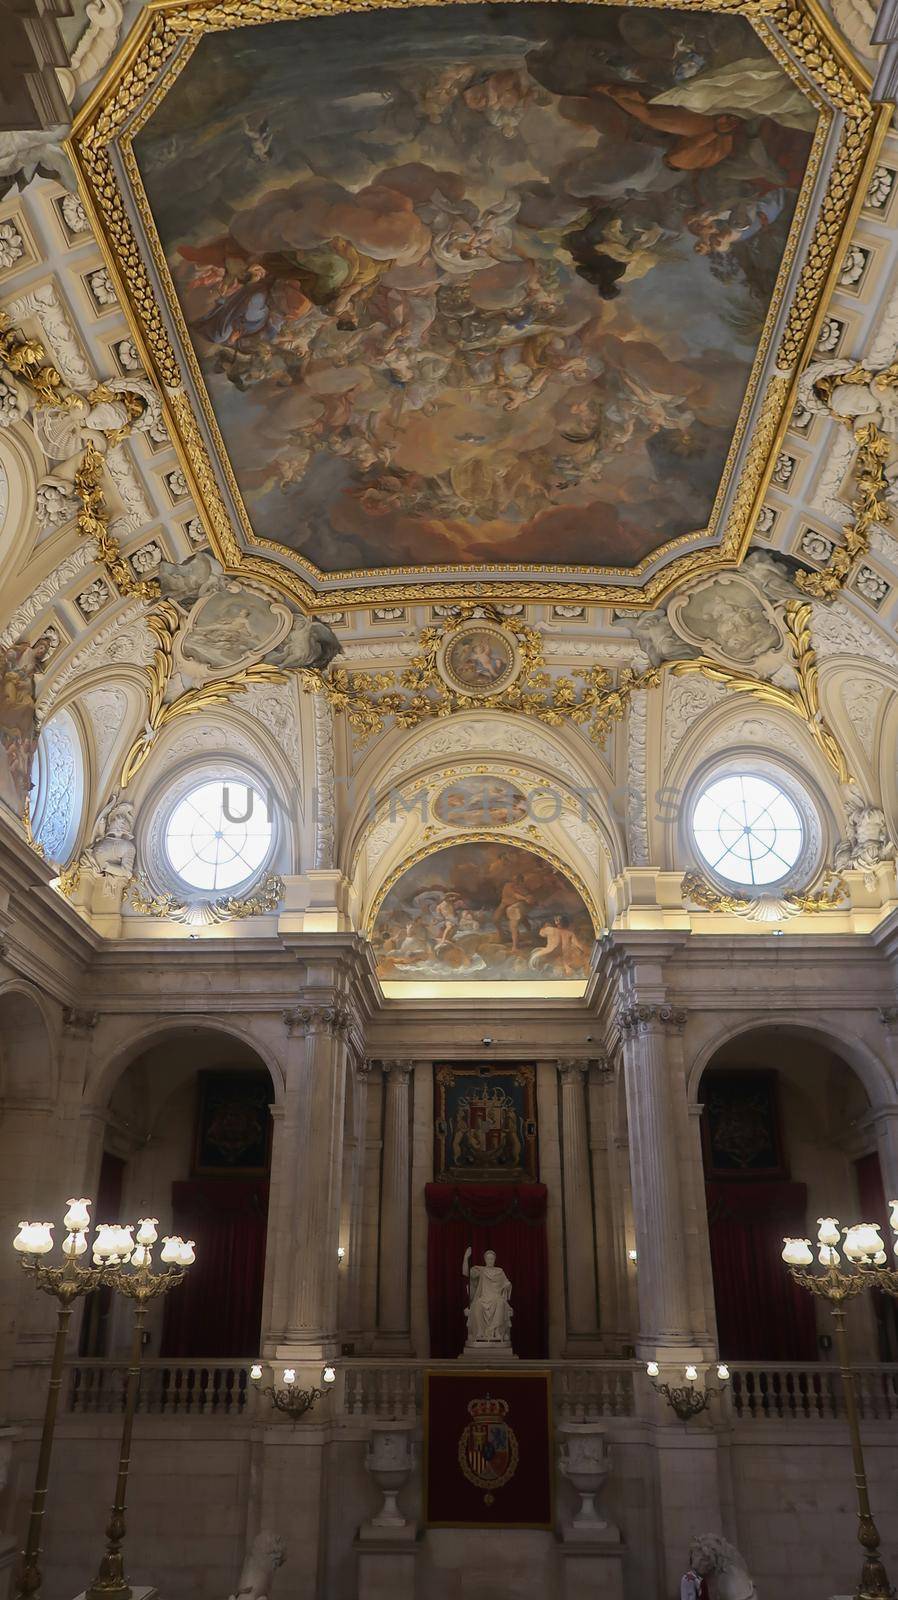 Madrid, Spain - 21 - September - 2020: Interior view of the Royal Palace of Madrid